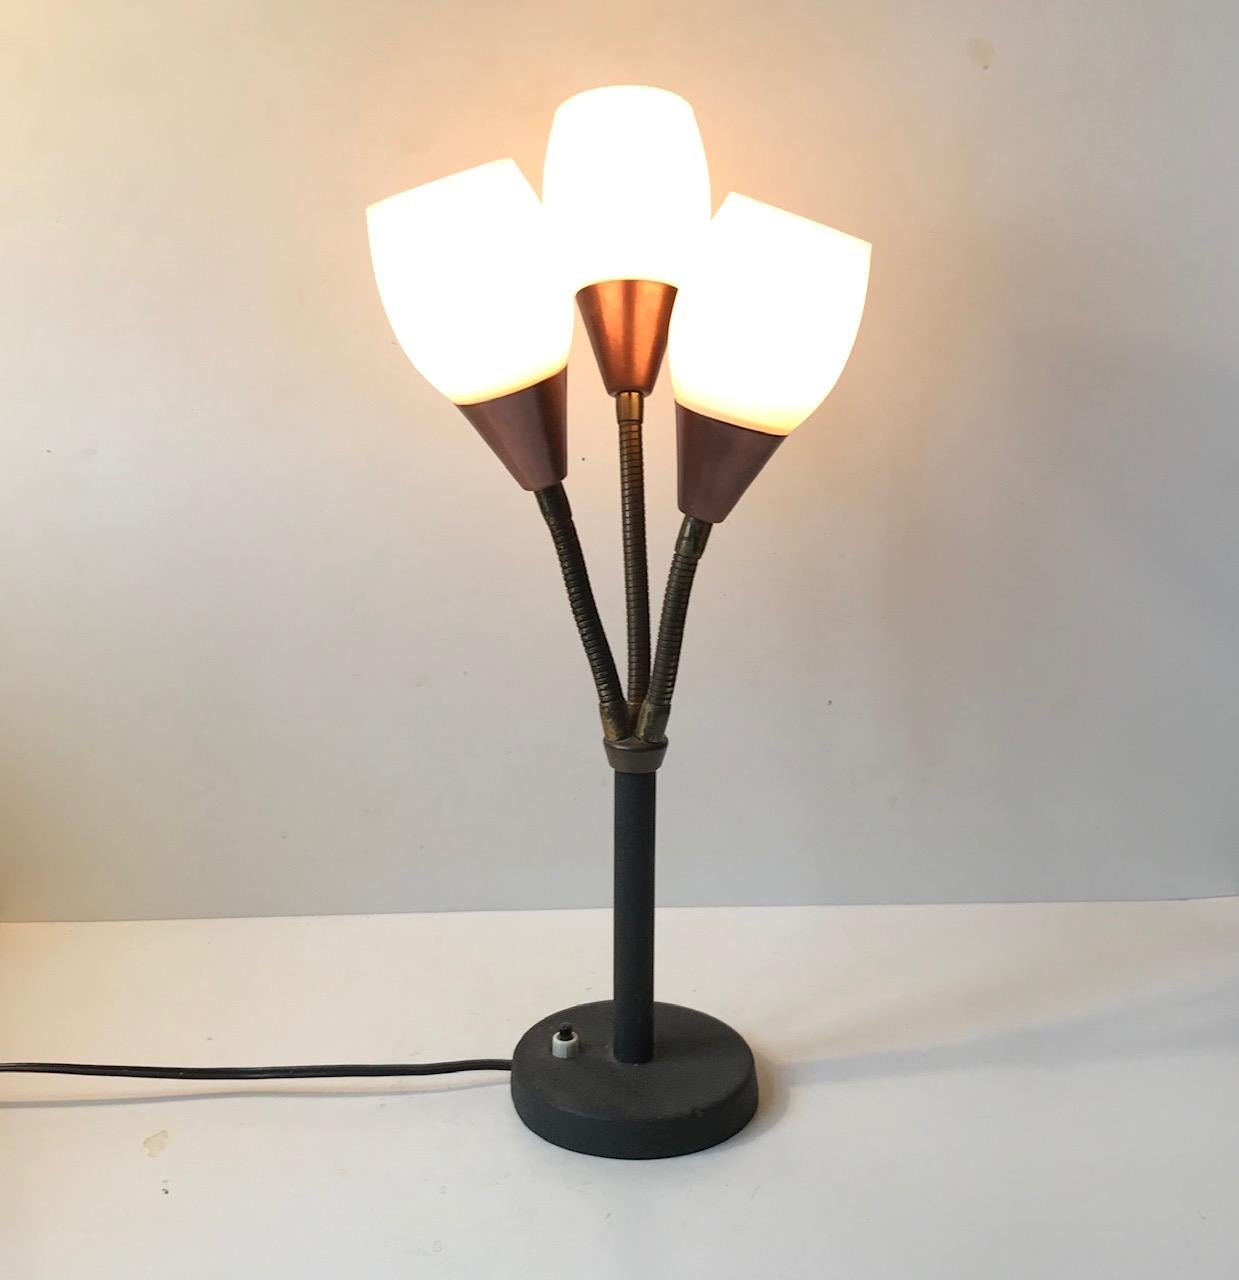 Three Shade Midcentury Table Lamp by E. S. Horn, 1950s In Good Condition For Sale In Esbjerg, DK